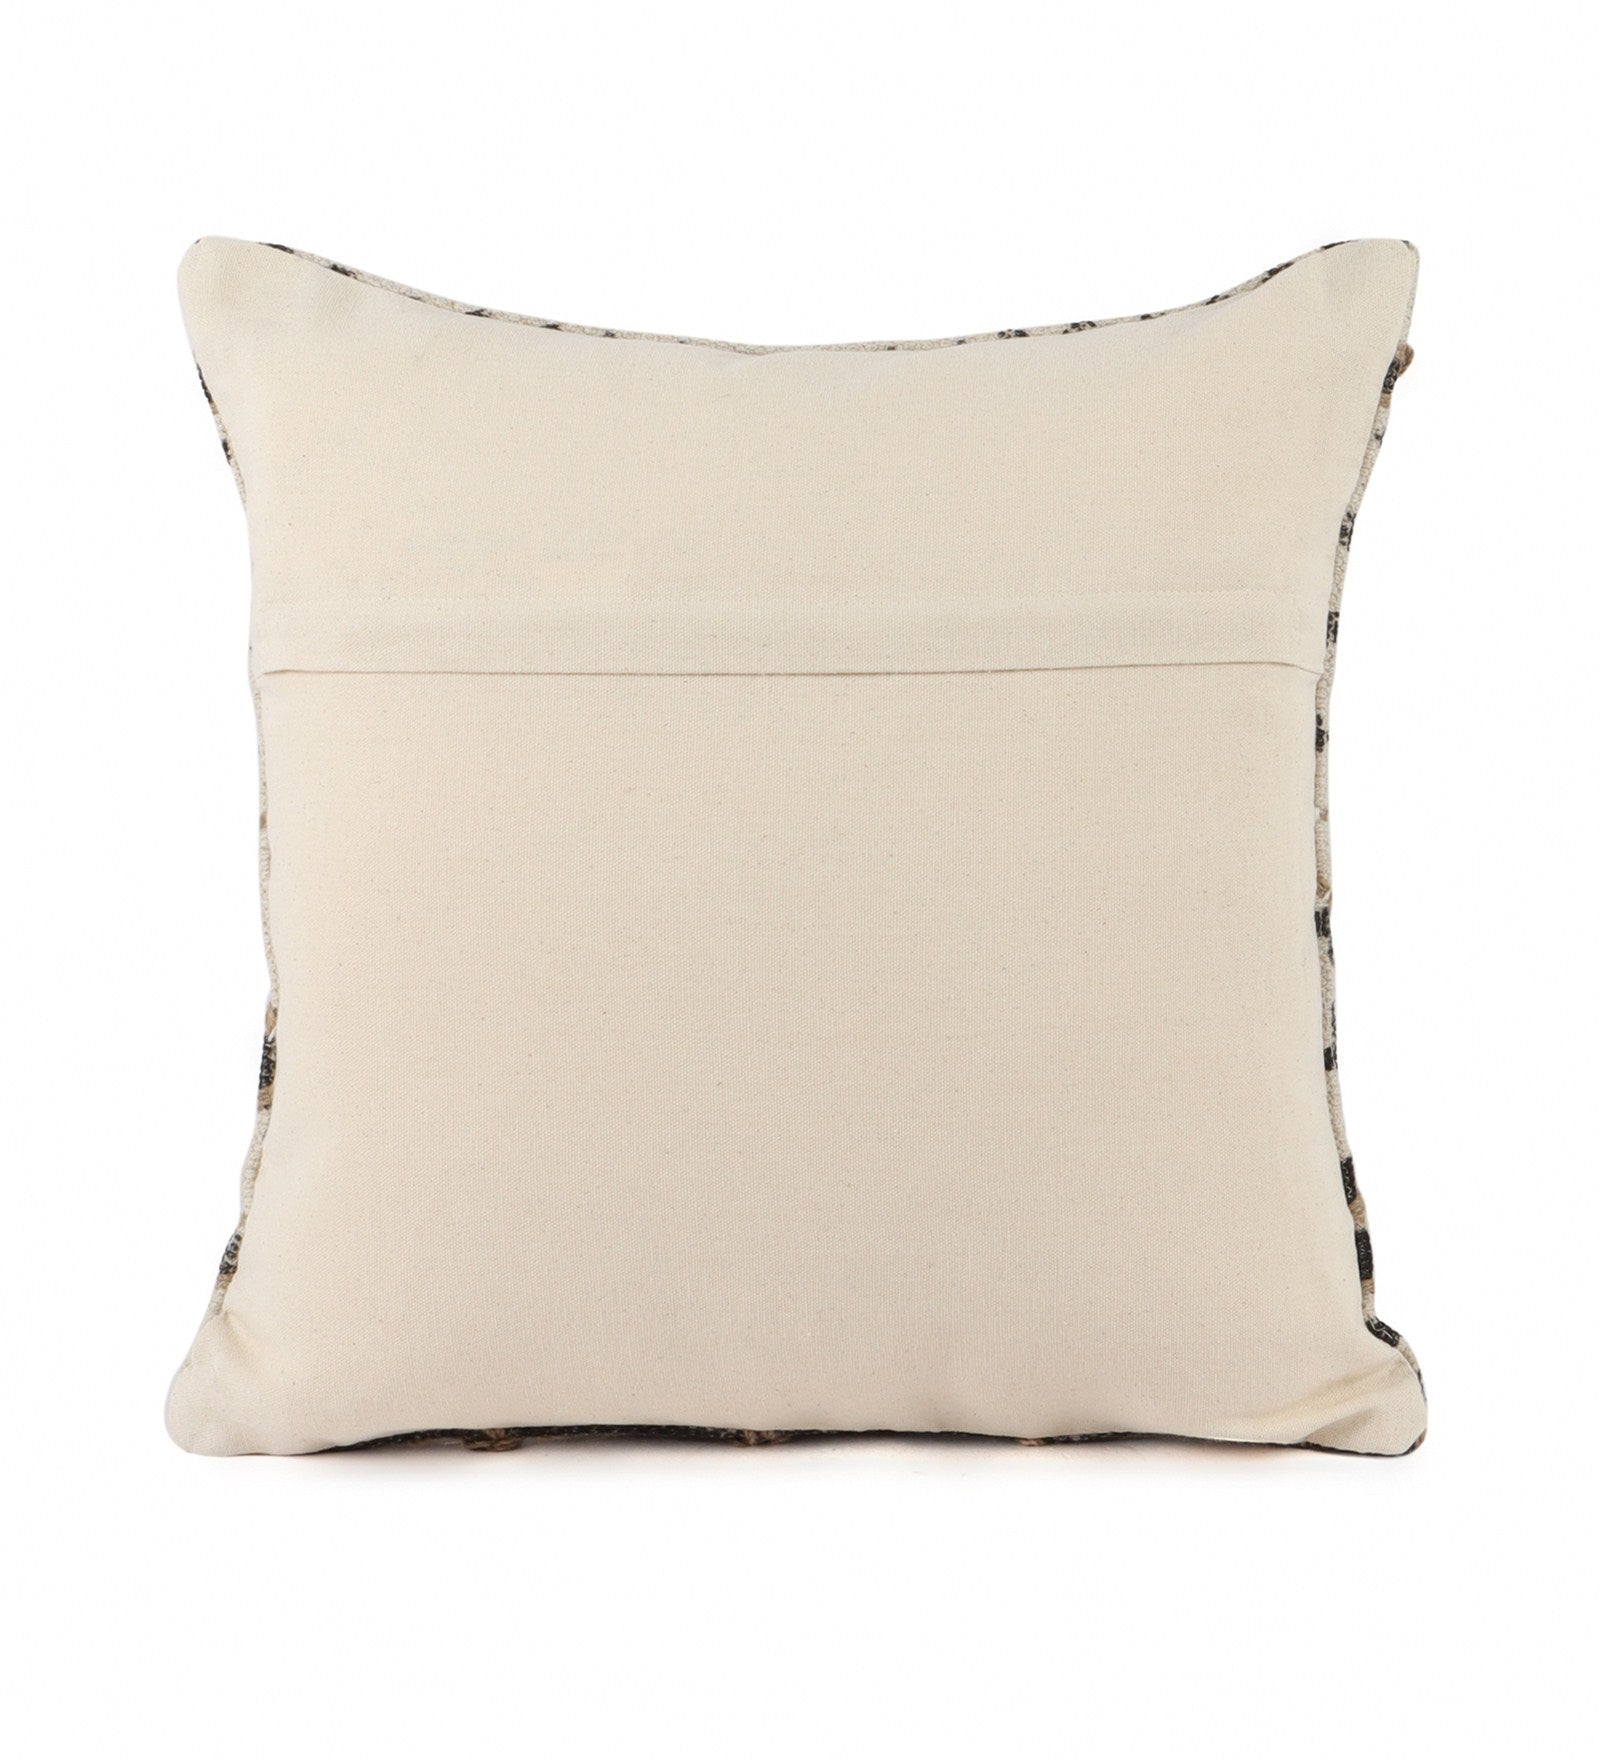 Embroidered Contemporary Cushion Cover (Beige Cross)